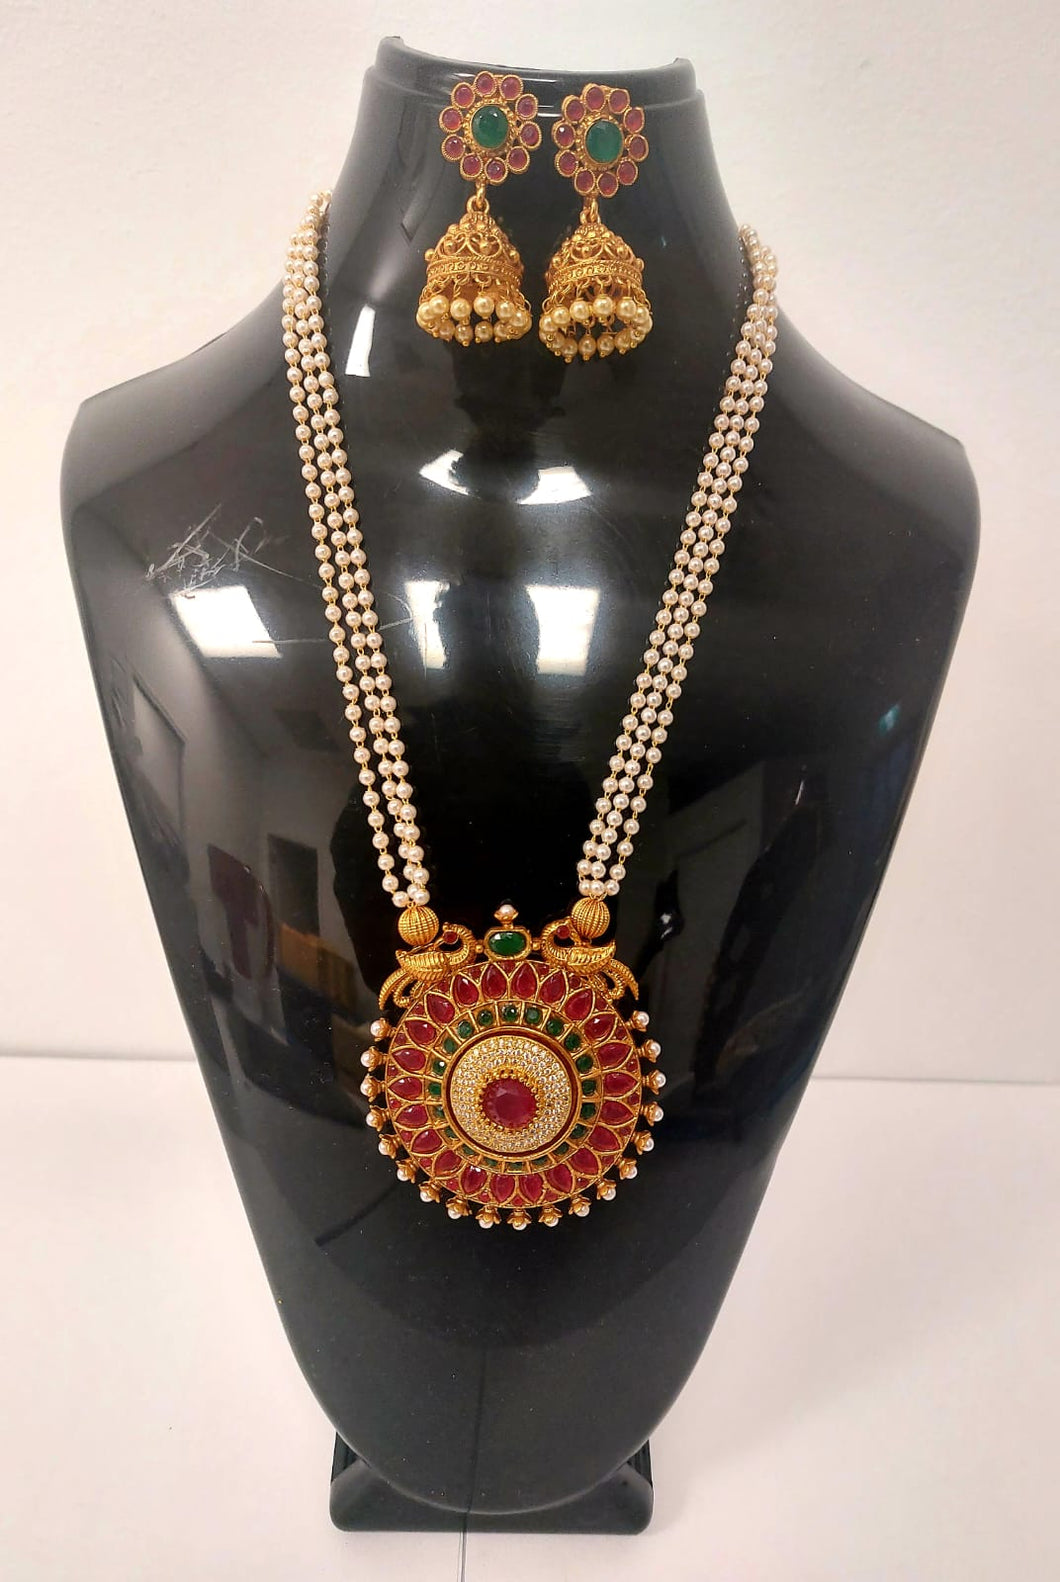 Accessories - Necklace